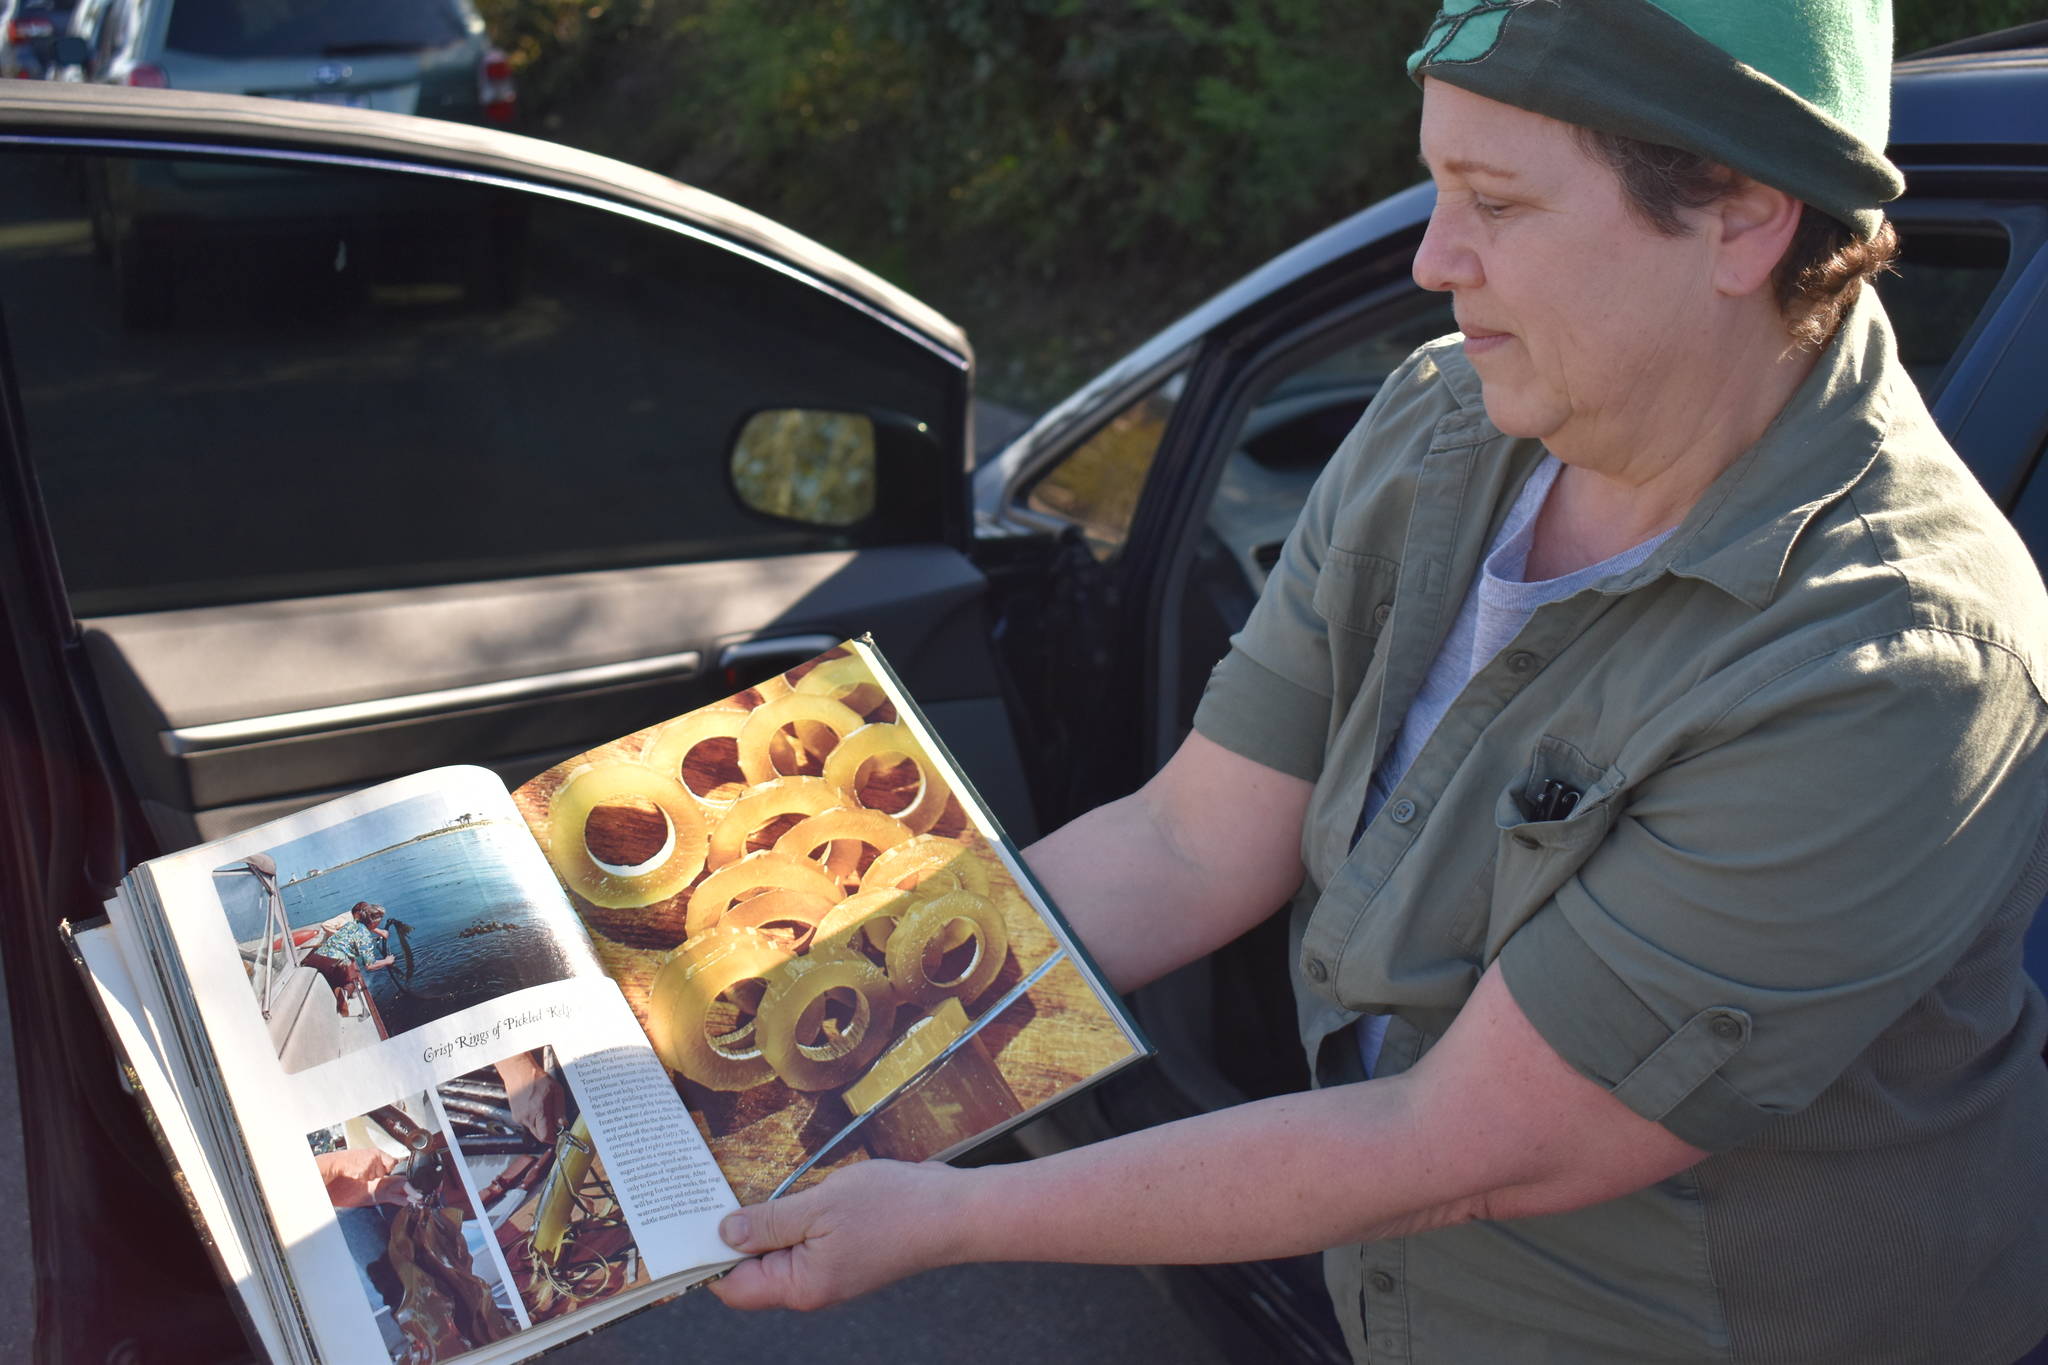 Photos by Emily Gilbert/Whidbey News-Times
Karen Achabal holds an old magazine showing a woman from Port Townsend who makes kelp pickles. Achabal said she has been interested in seaweed harvesting since she first read the story as a kid.